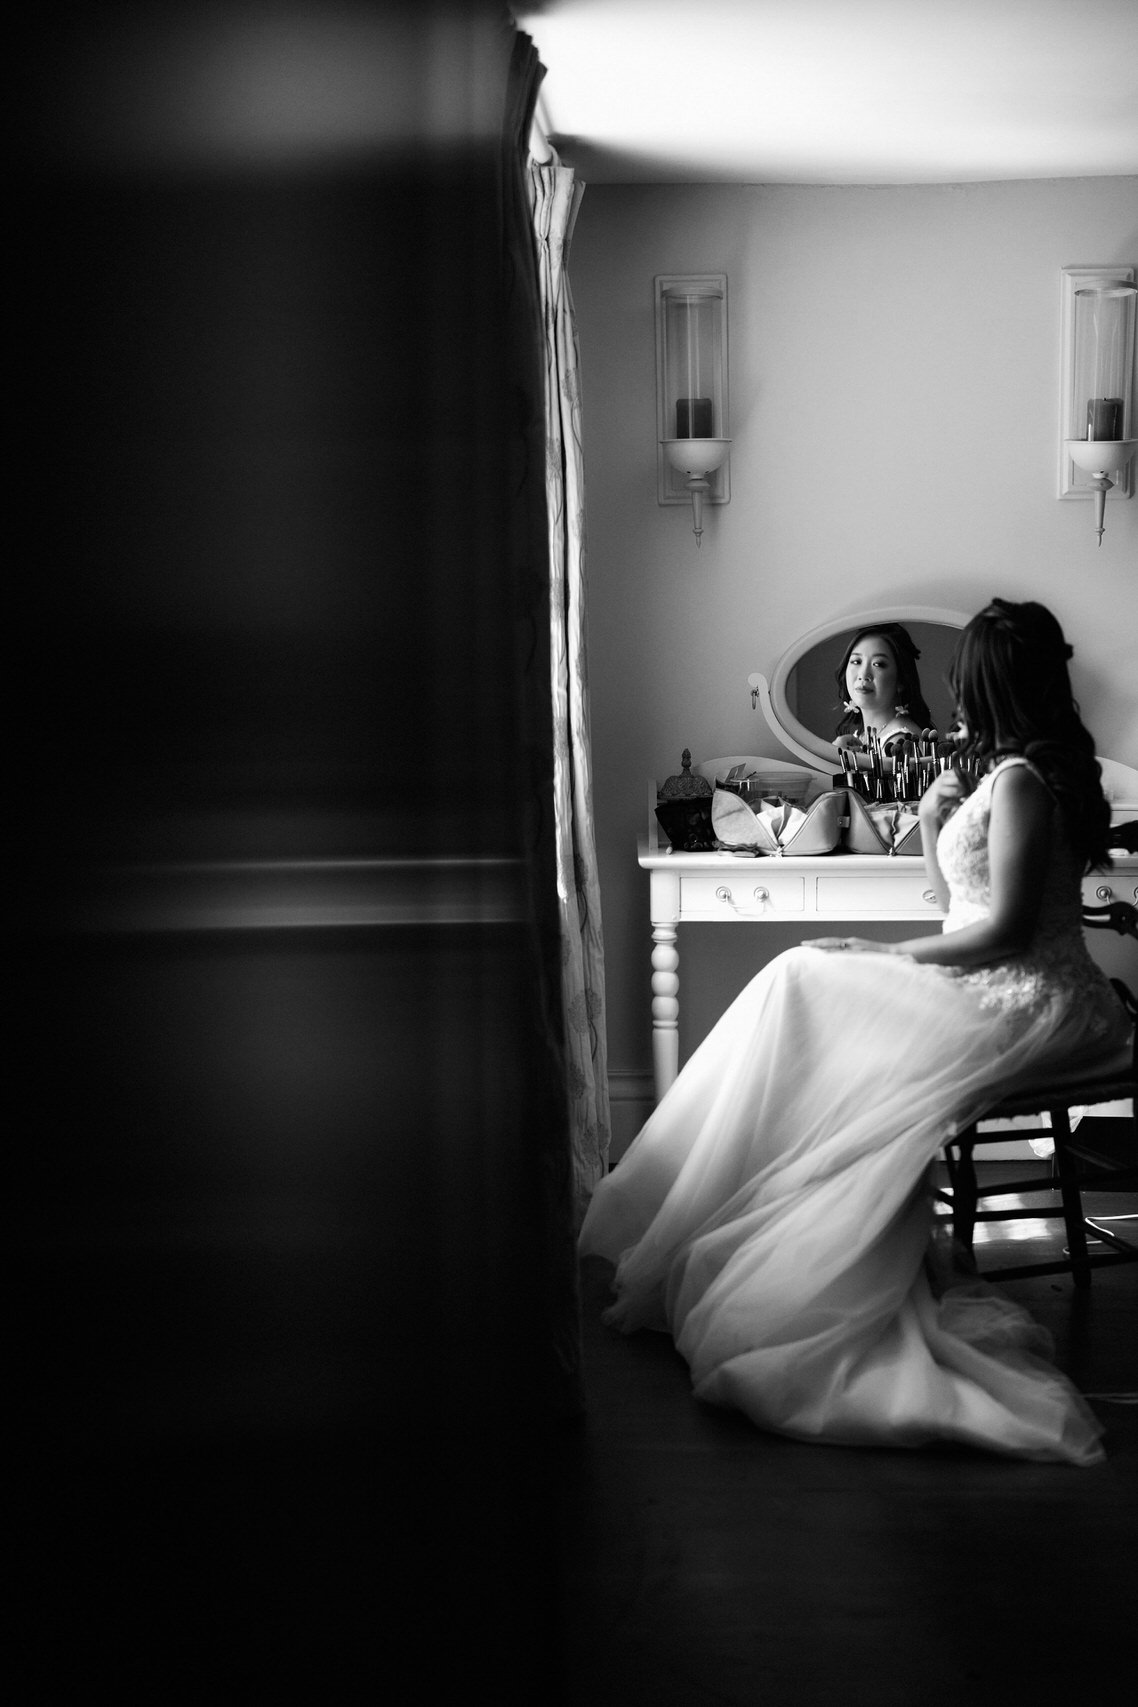 A bride is preparing herself in front of a mirror.